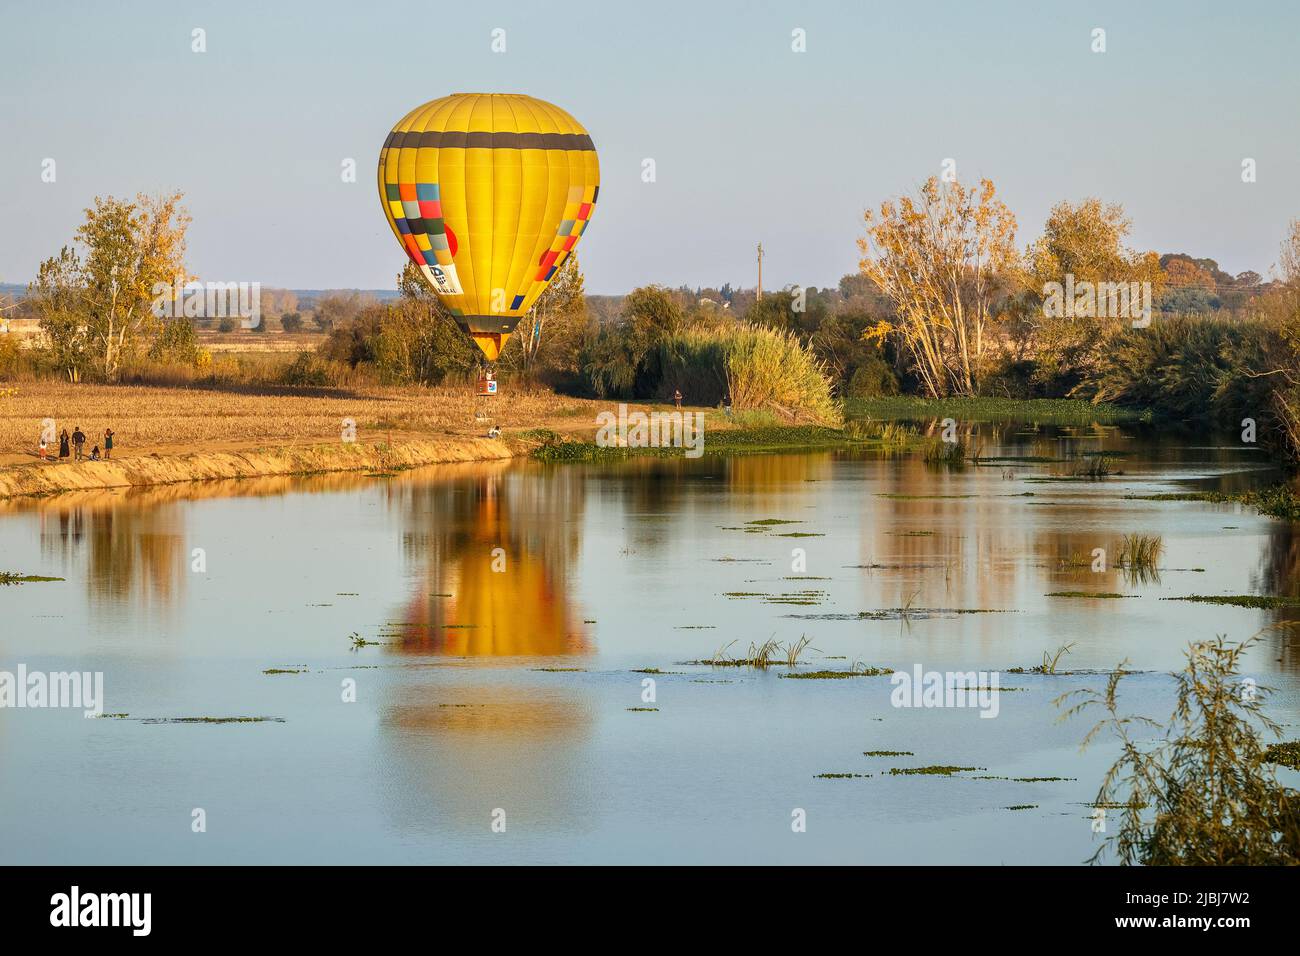 Coruche, Portugal - November 13, 2021: View over the Sorraia River in Coruche, Portugal, with a hot air balloon flying low to the ground. Stock Photo